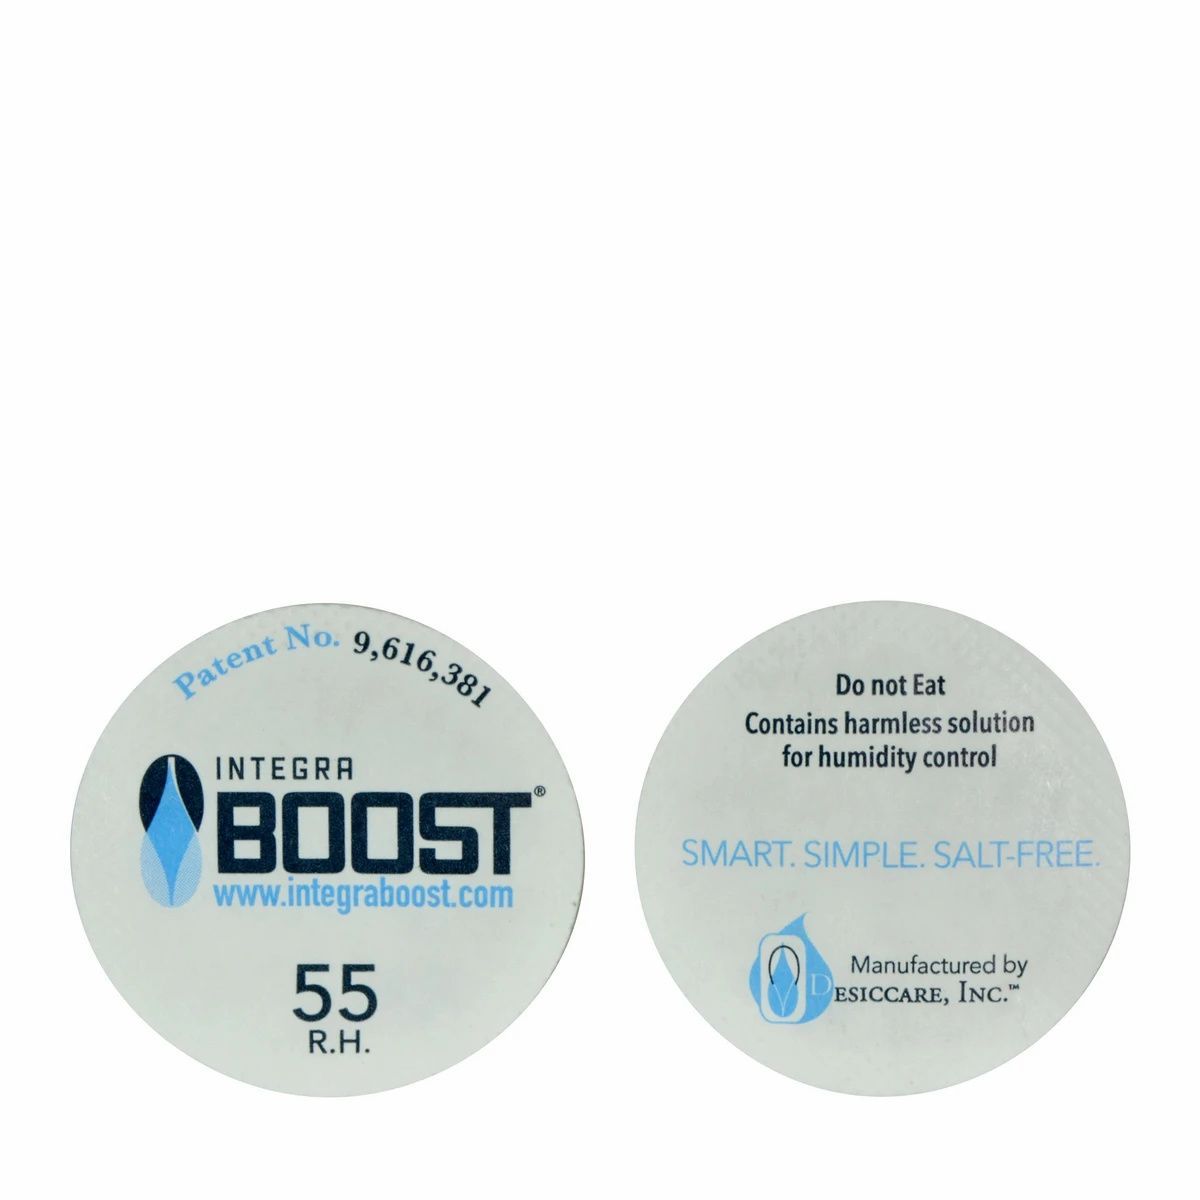 Integra Boost® 51mm Humidity Control Circles re salt-free, spill-proof and FDA-complaint so you can safely and confidently place Integra BOOST® circle packs directly inside a container or jar alongside your herbs or place inside lids to absorb and/or provide excess moisture as needed